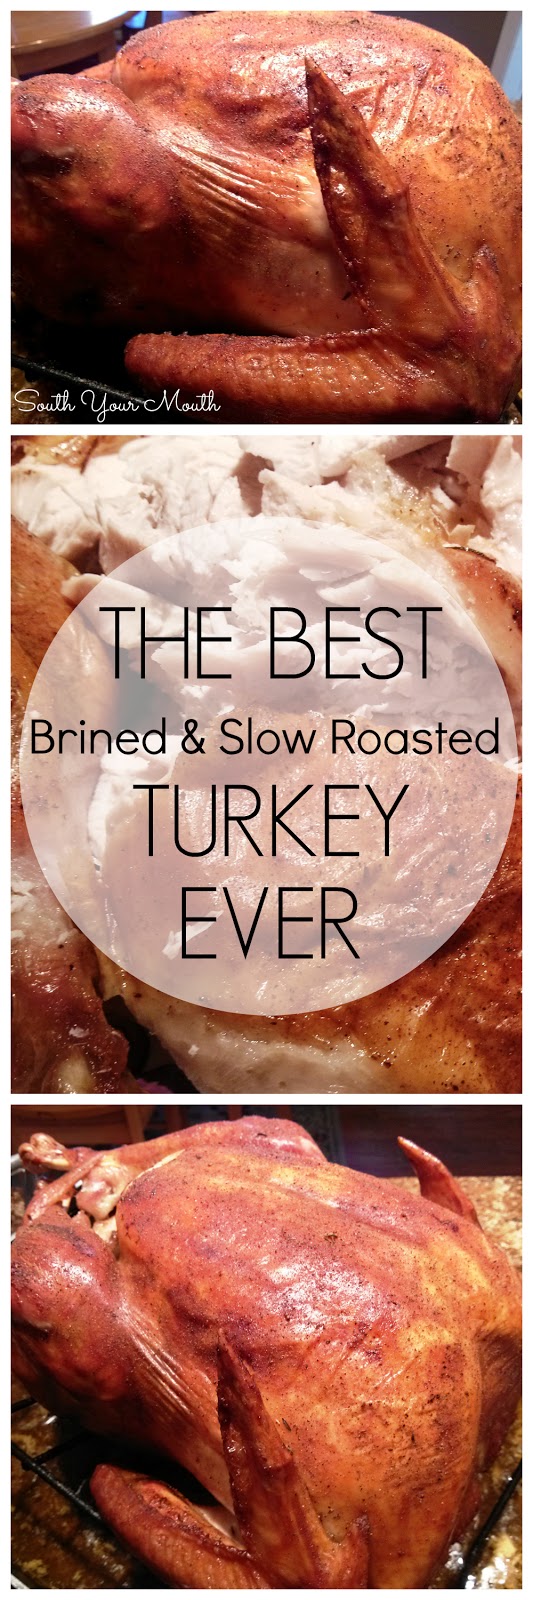 Jive Turkey - A brined and slow-roasted turkey seasoned with a special blend of herbs and spices with a special cooking method that makes it SO moist!